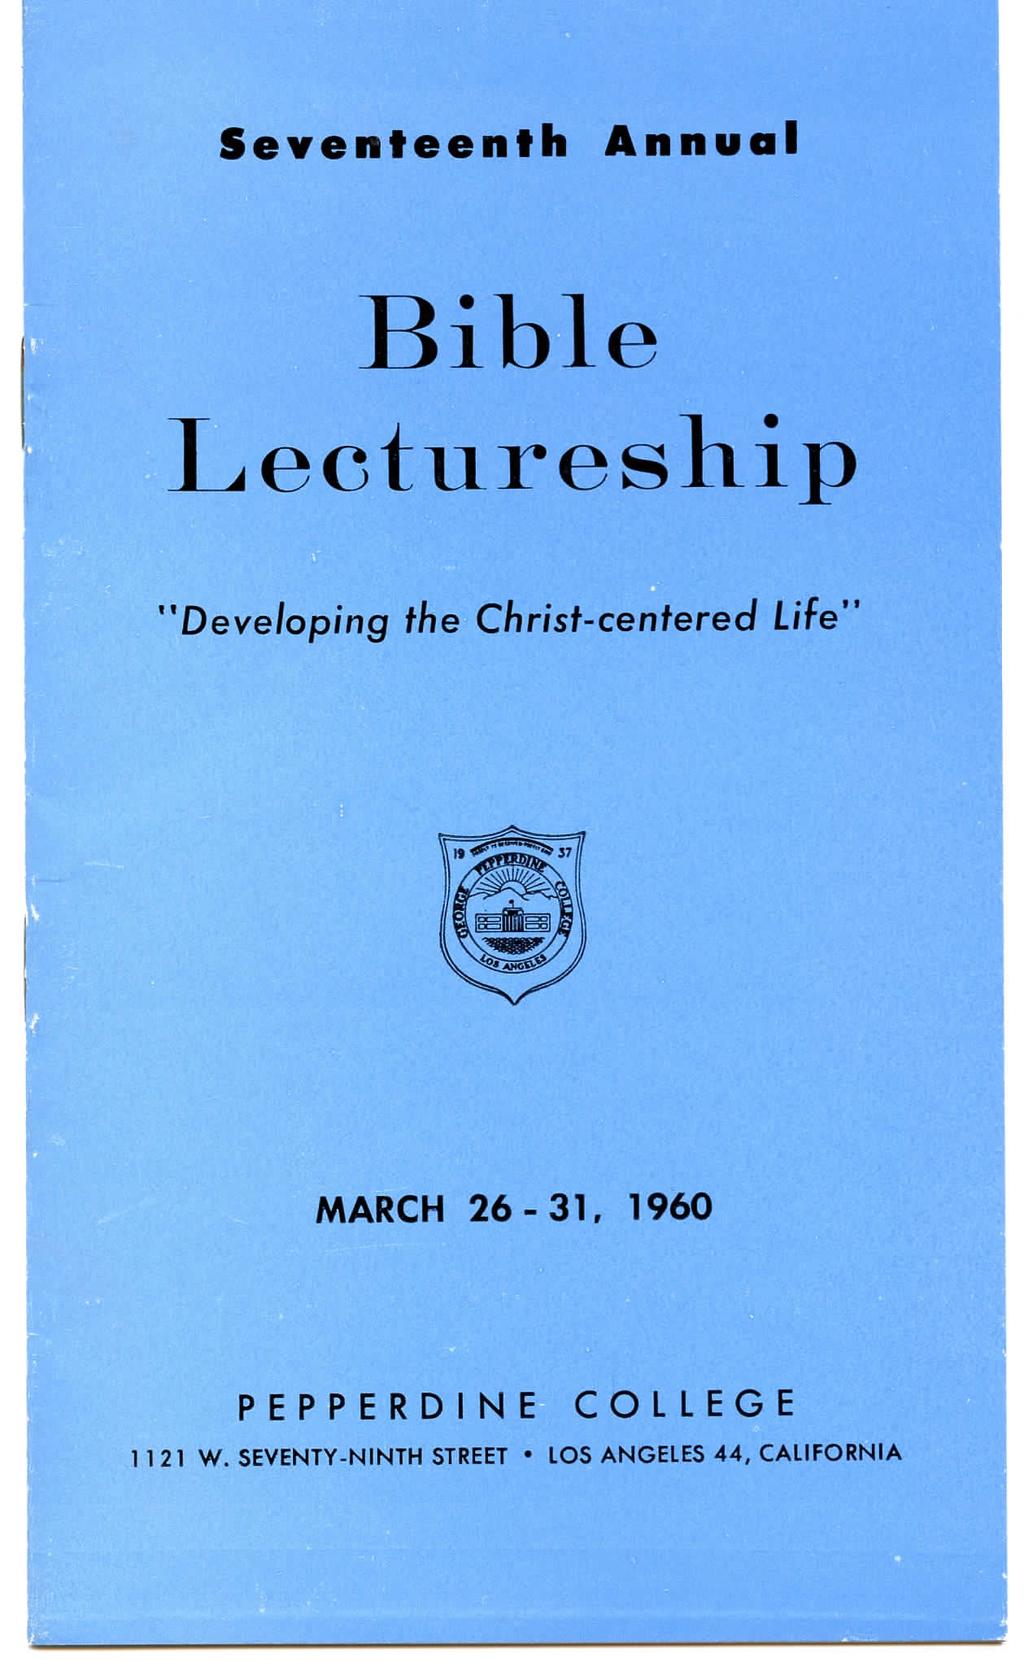 Seventeenth Annual Bible Lectureship "Developing the Christ-centered Life" MARCH